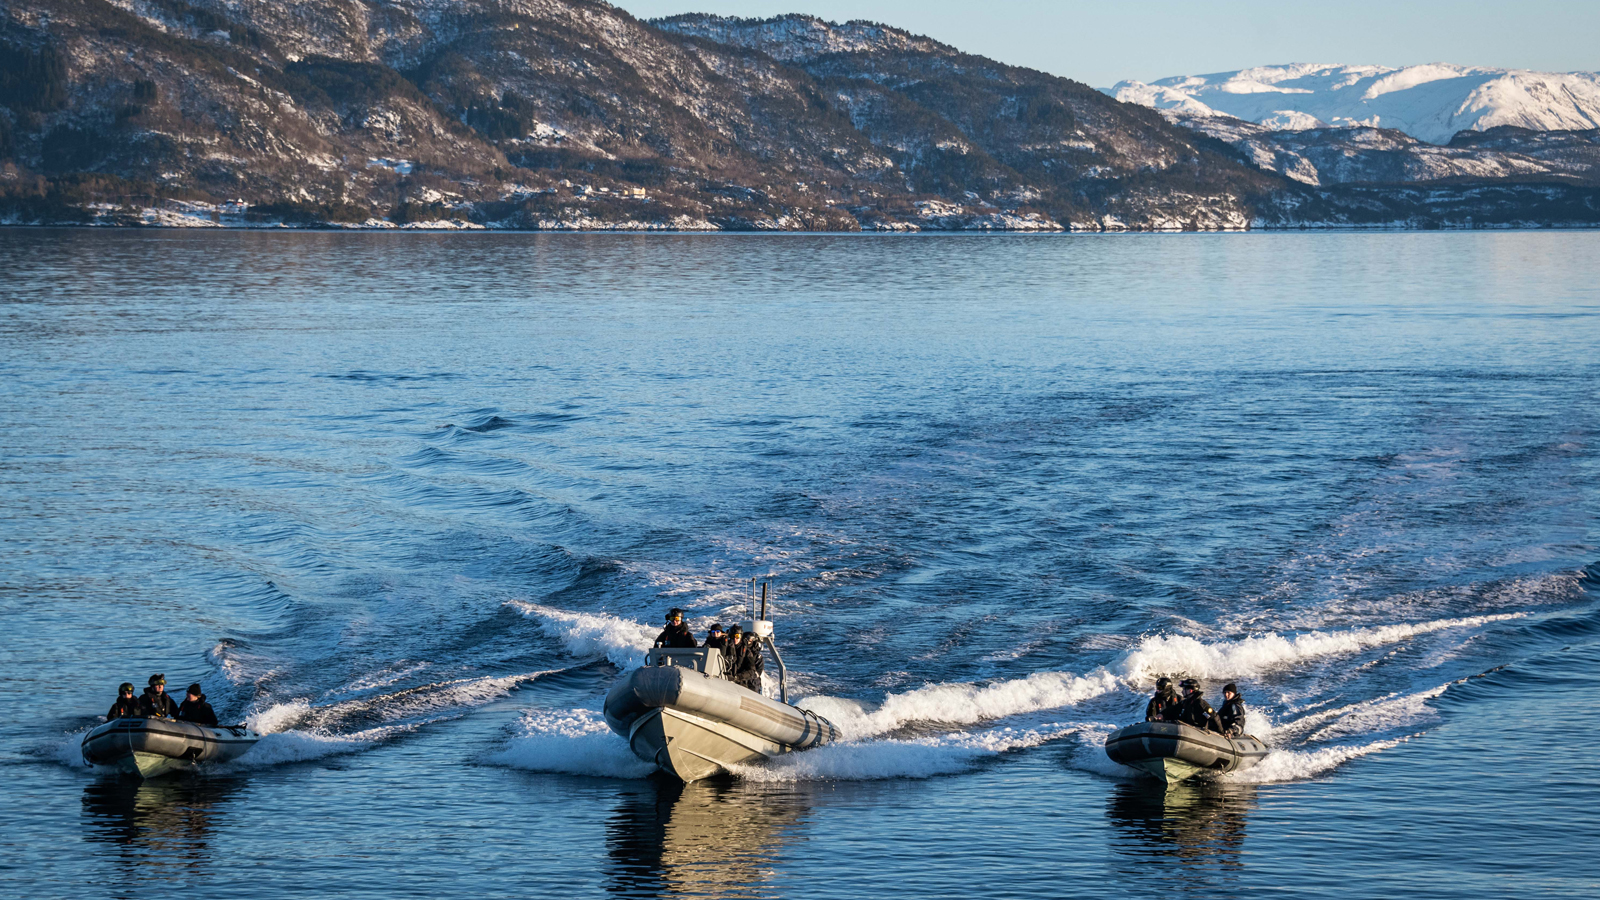 Members of HMCS Halifax’s deck department in the fjords of Norway